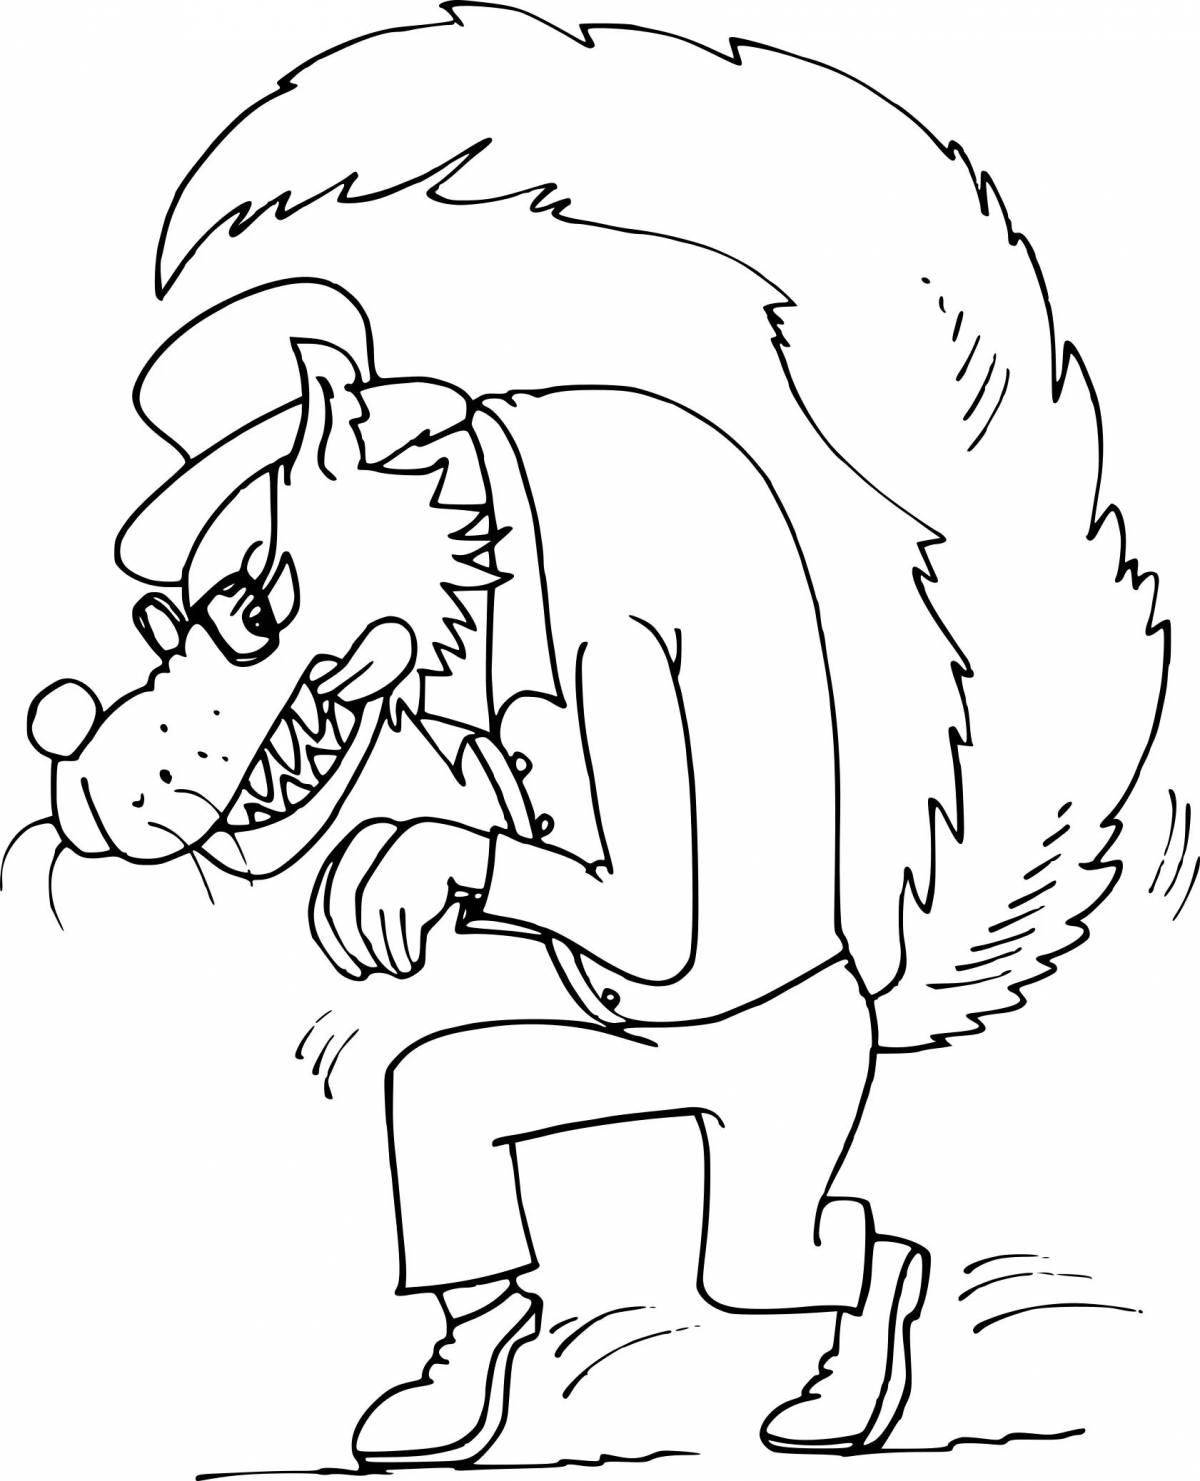 Fantastic wolf coloring page